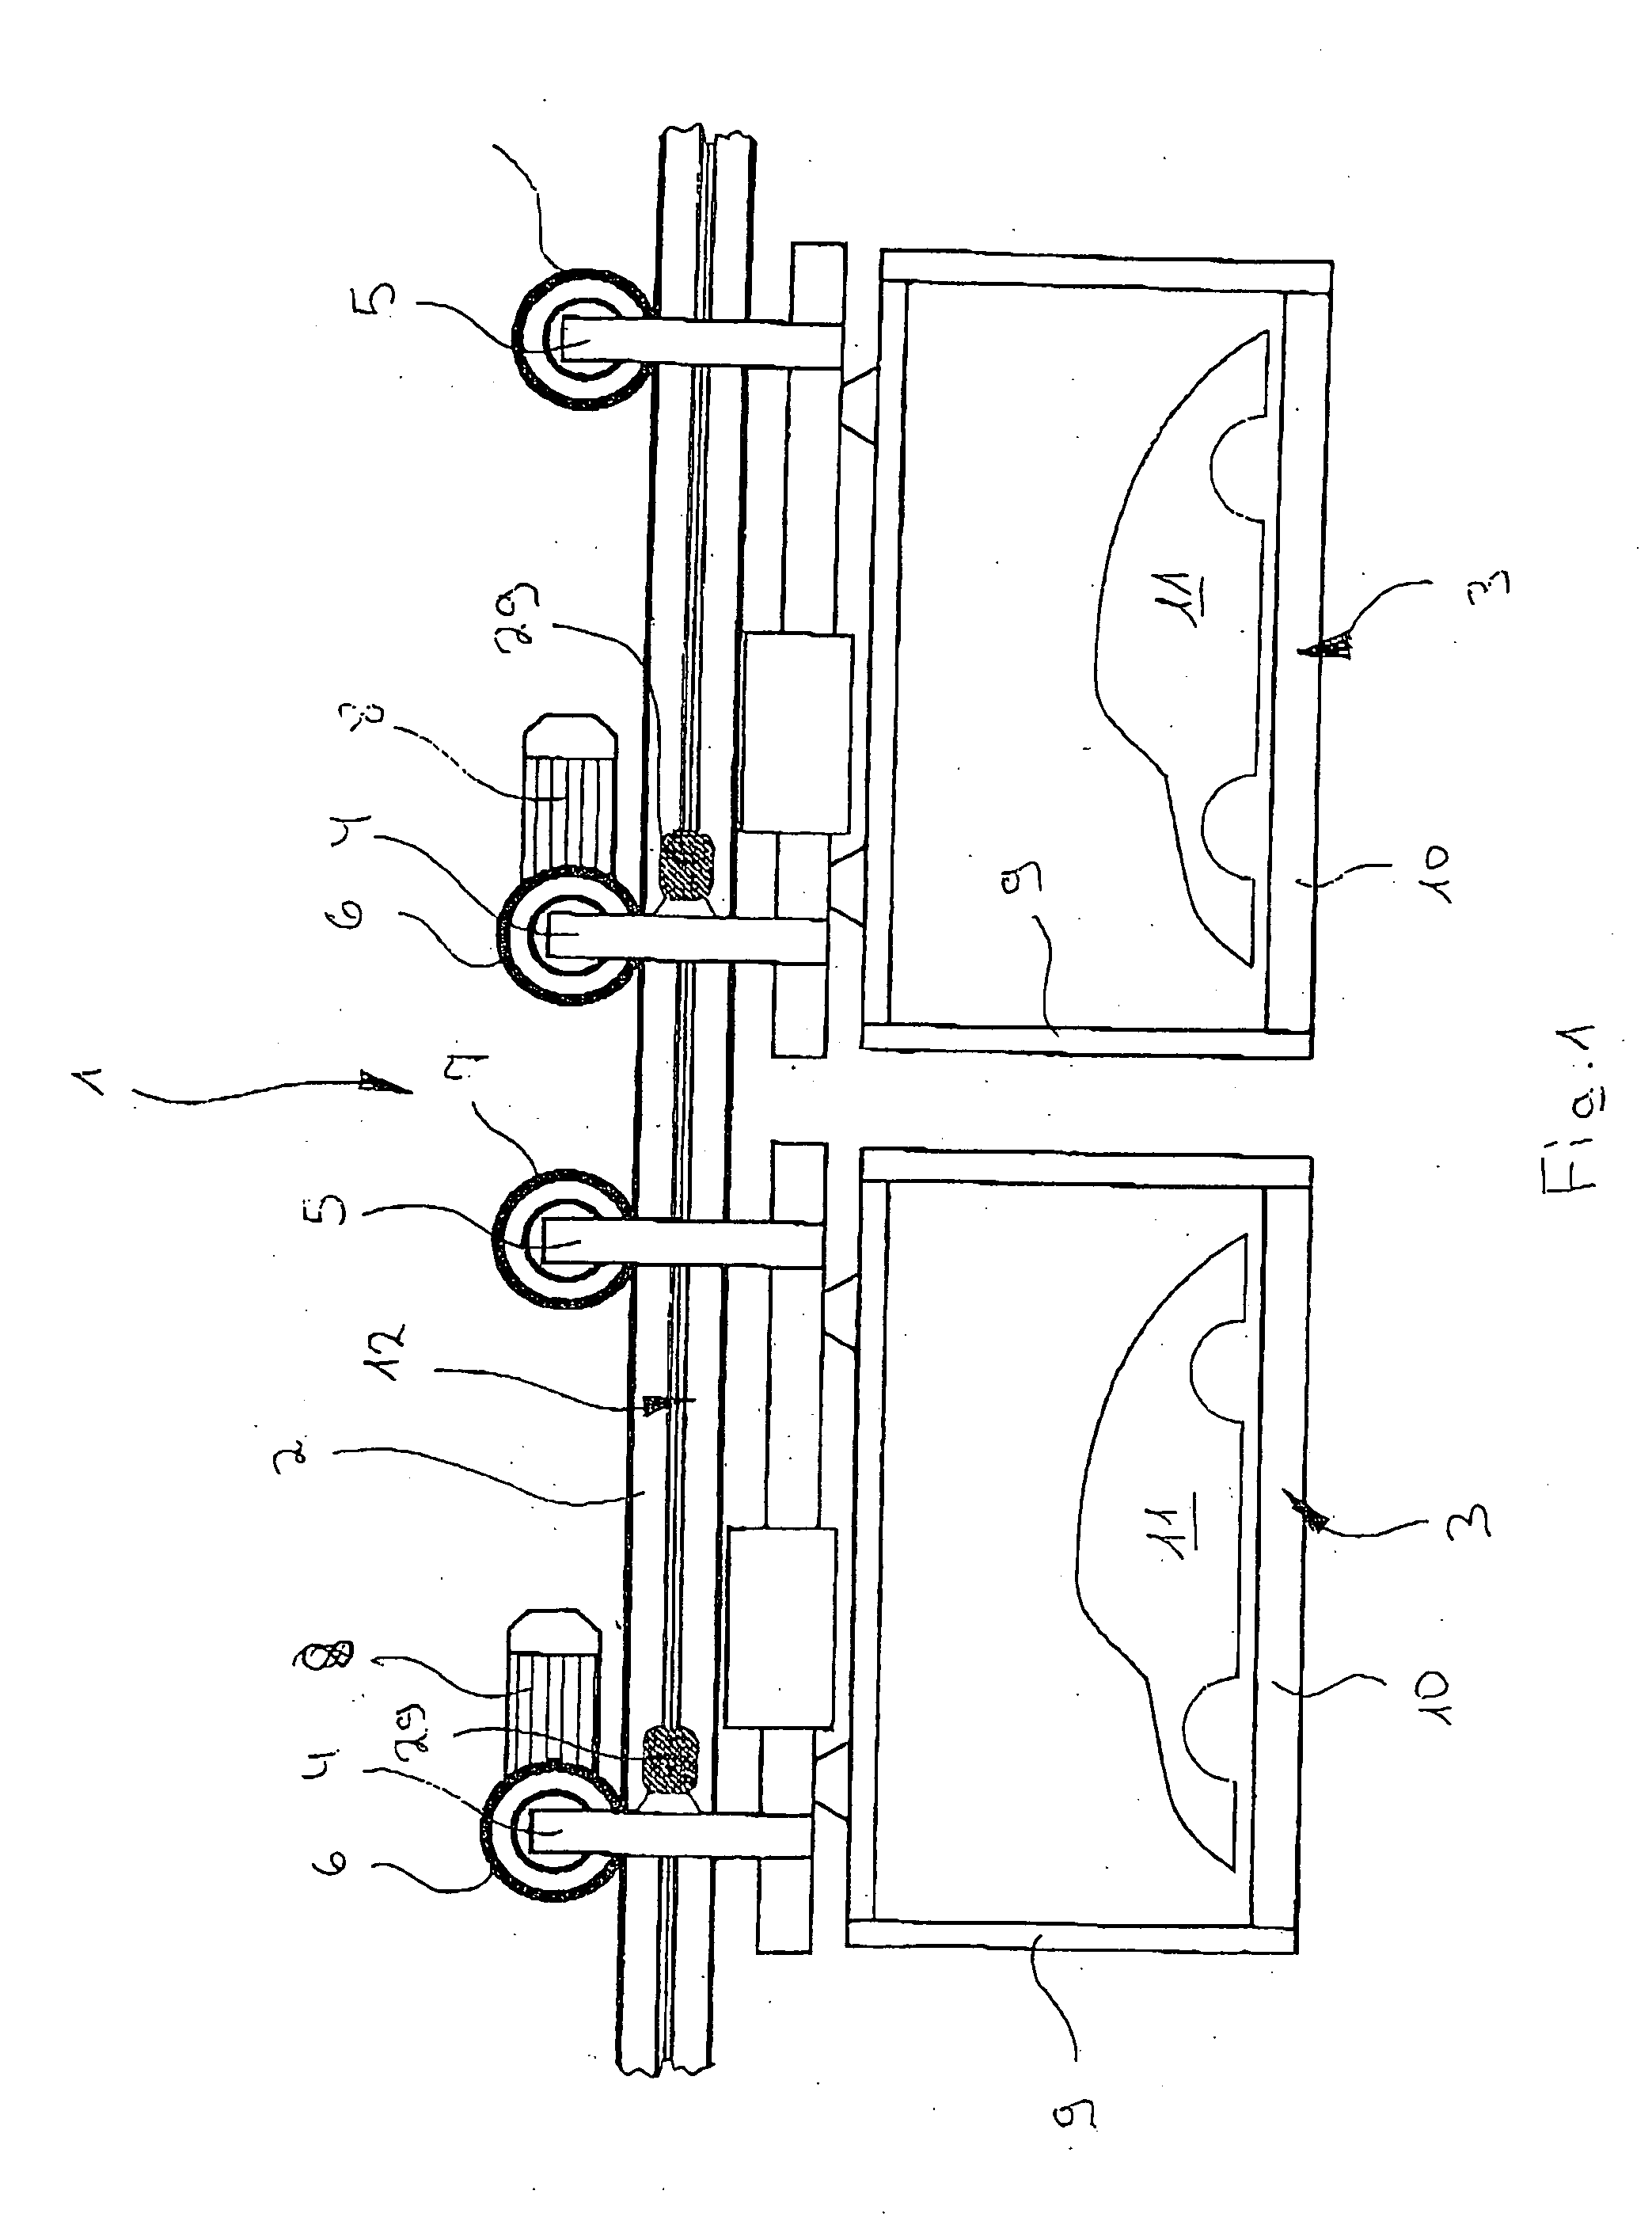 Device for the contactless transfer of electrical energy